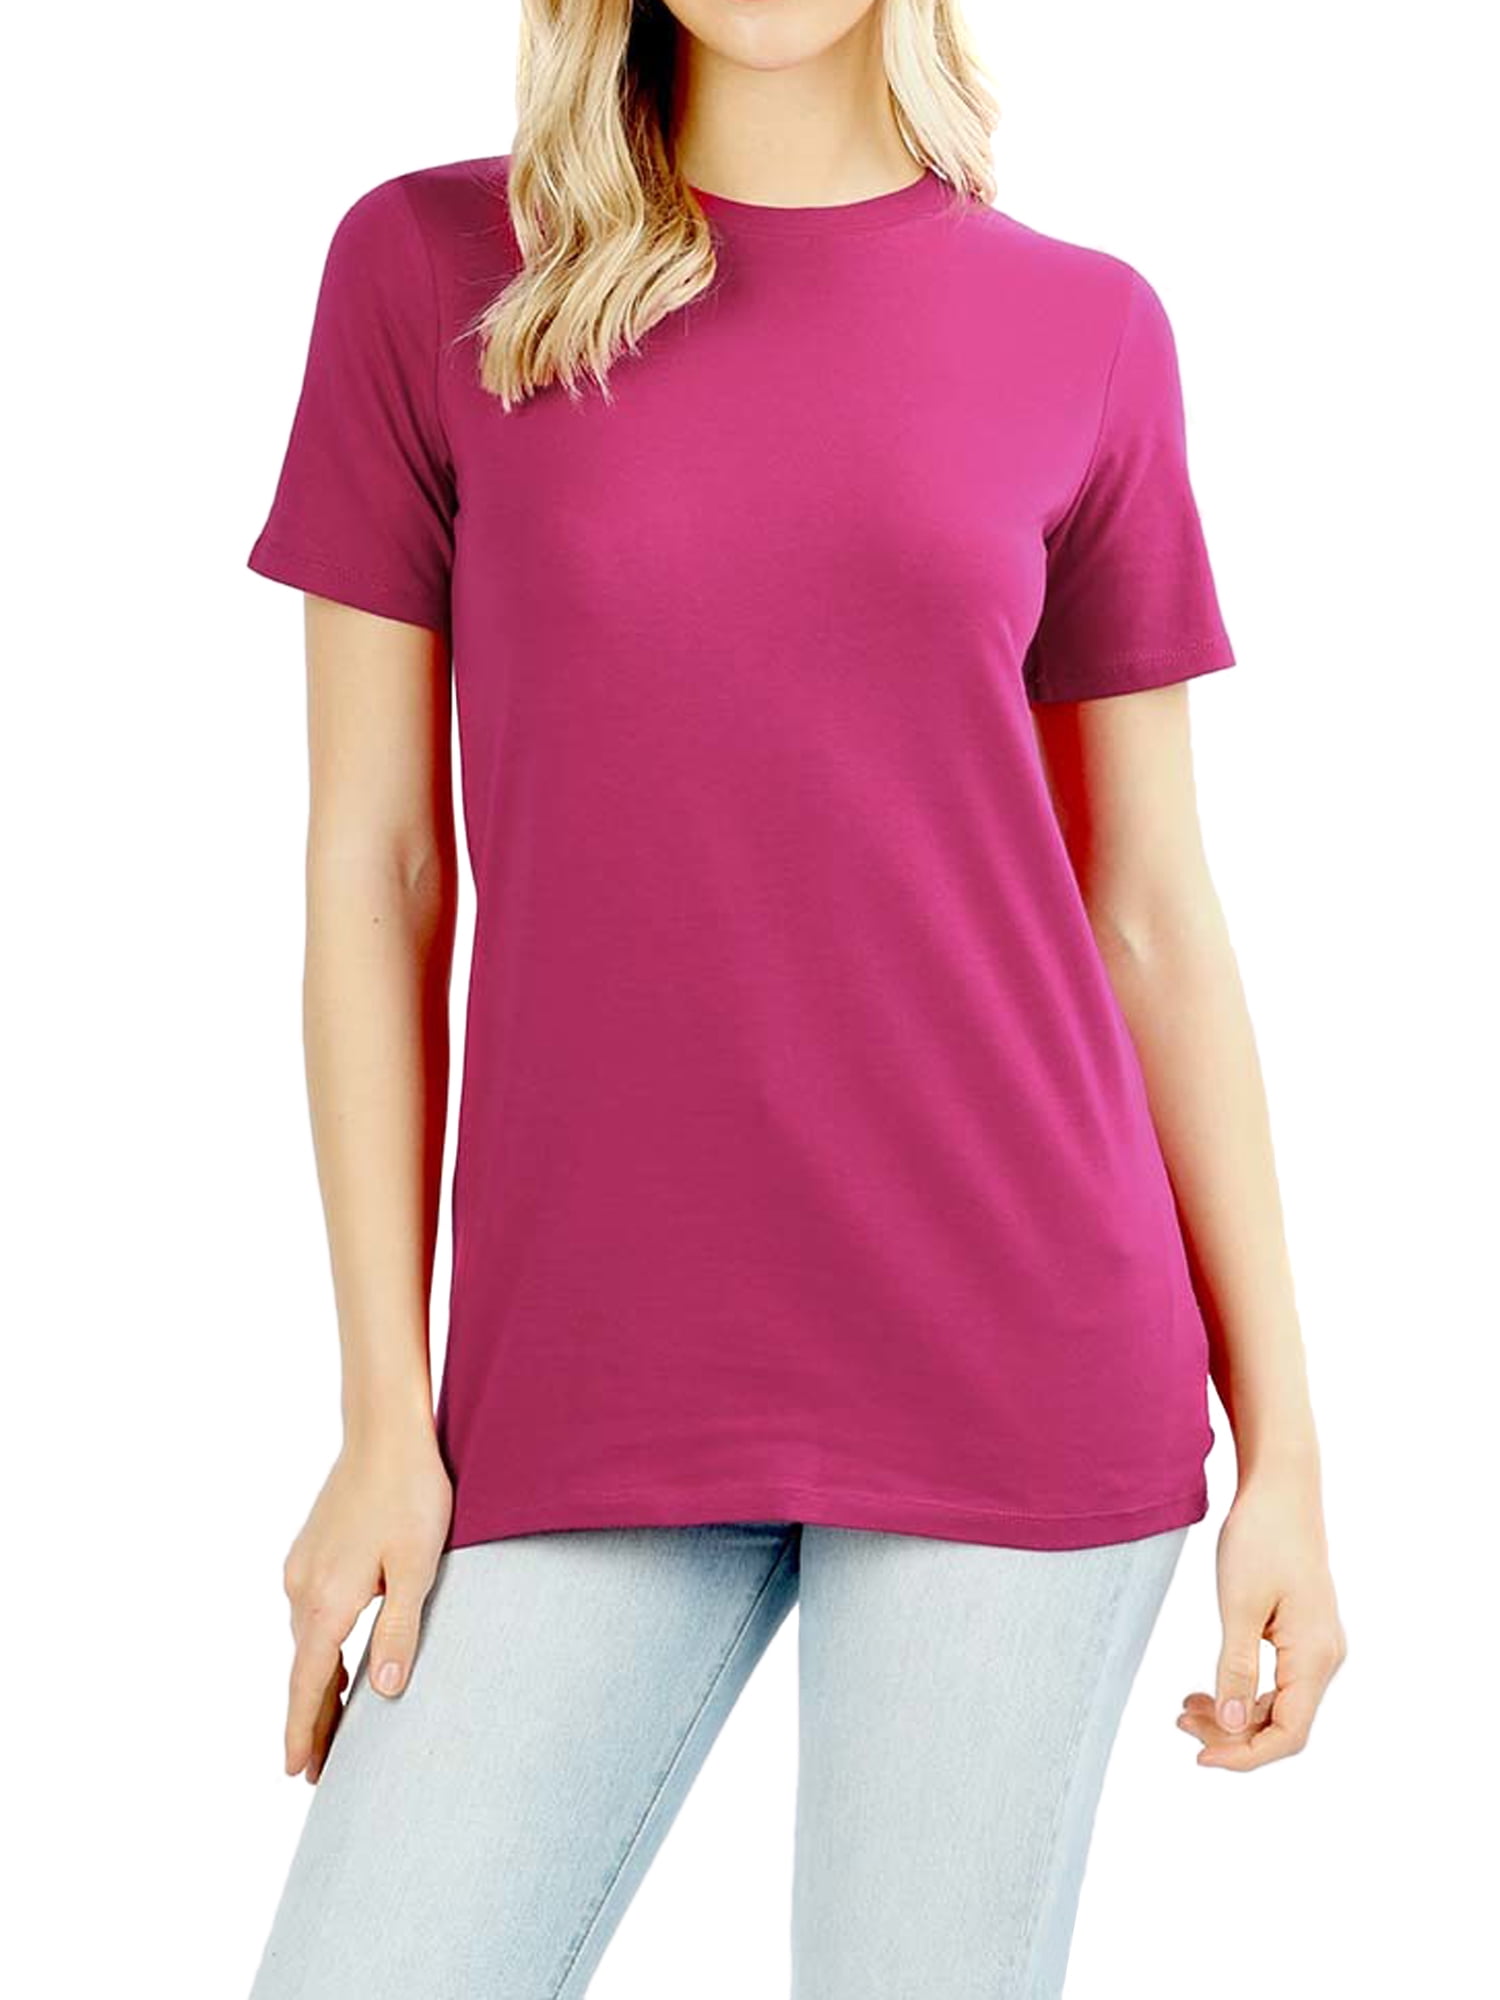 TheLovely - Women's Cotton Crew Neck Short Sleeve Relaxed Fit Basic Tee